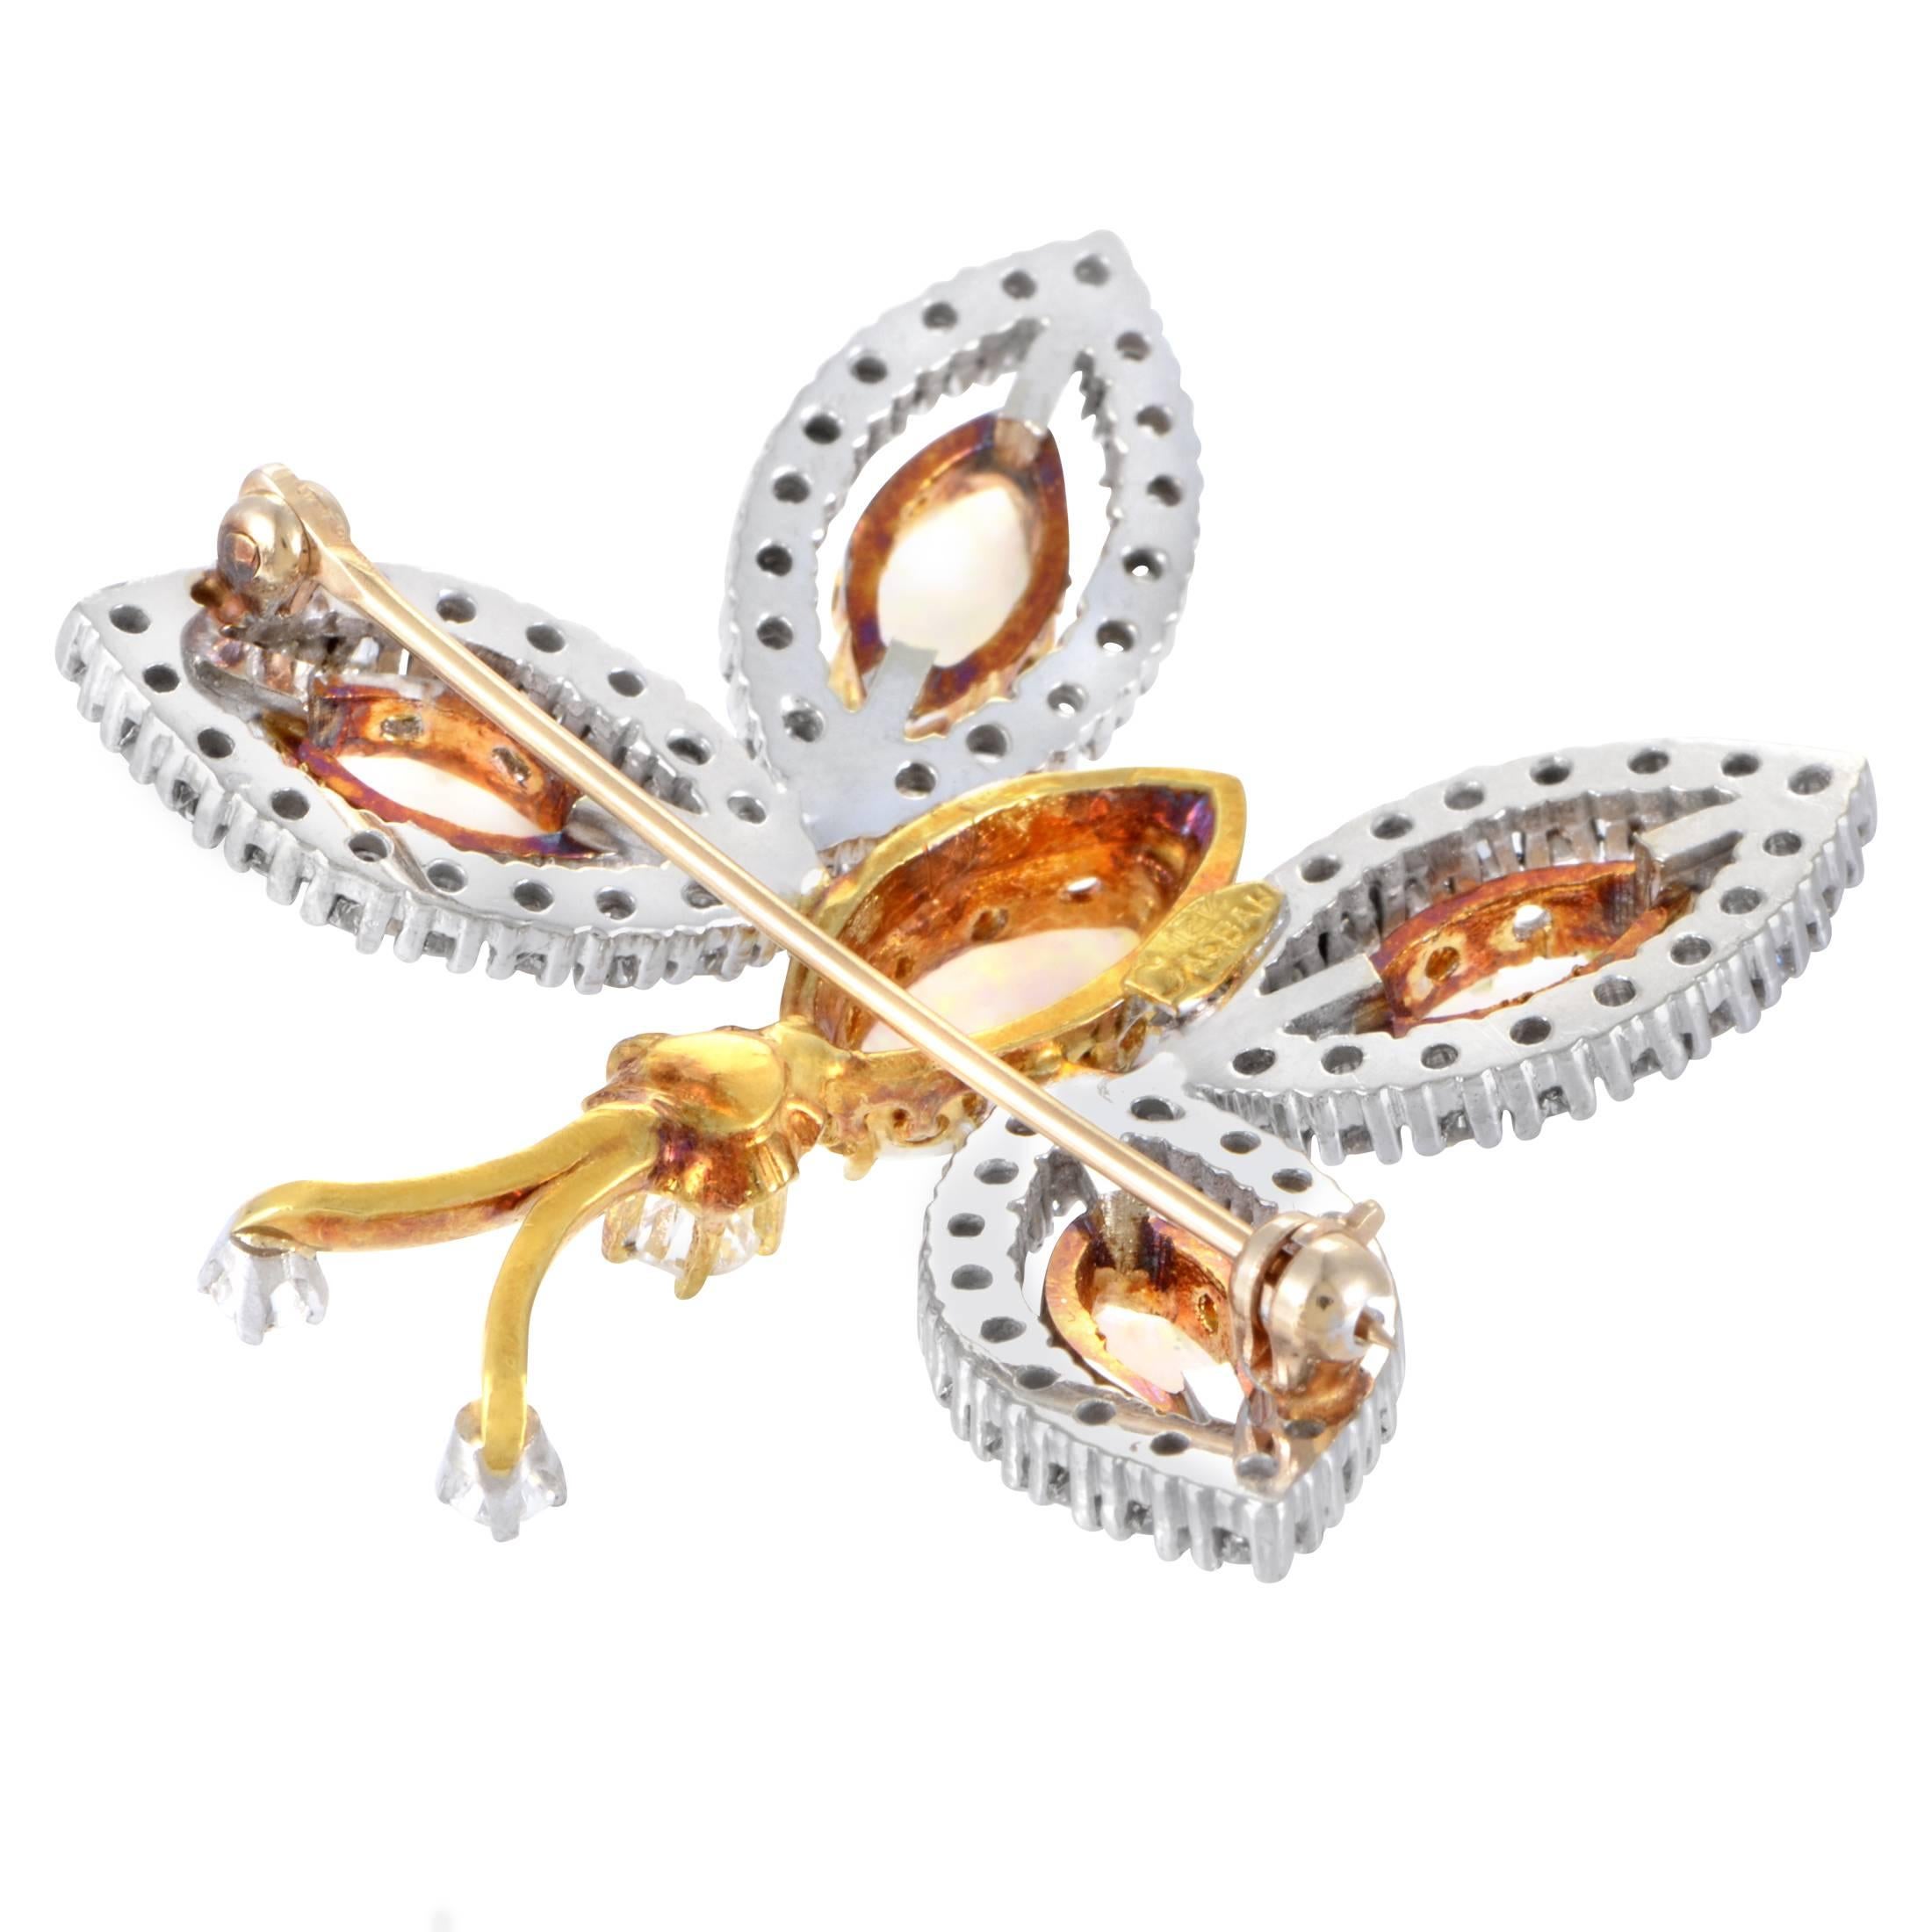 This dainty design from Casbah is adorable and sweet. The brooch is made of 18K white and yellow gold and is paved with 2.40ct of diamonds. Lastly, the butterfly's body and wings are made of a luxurious white opal stones.